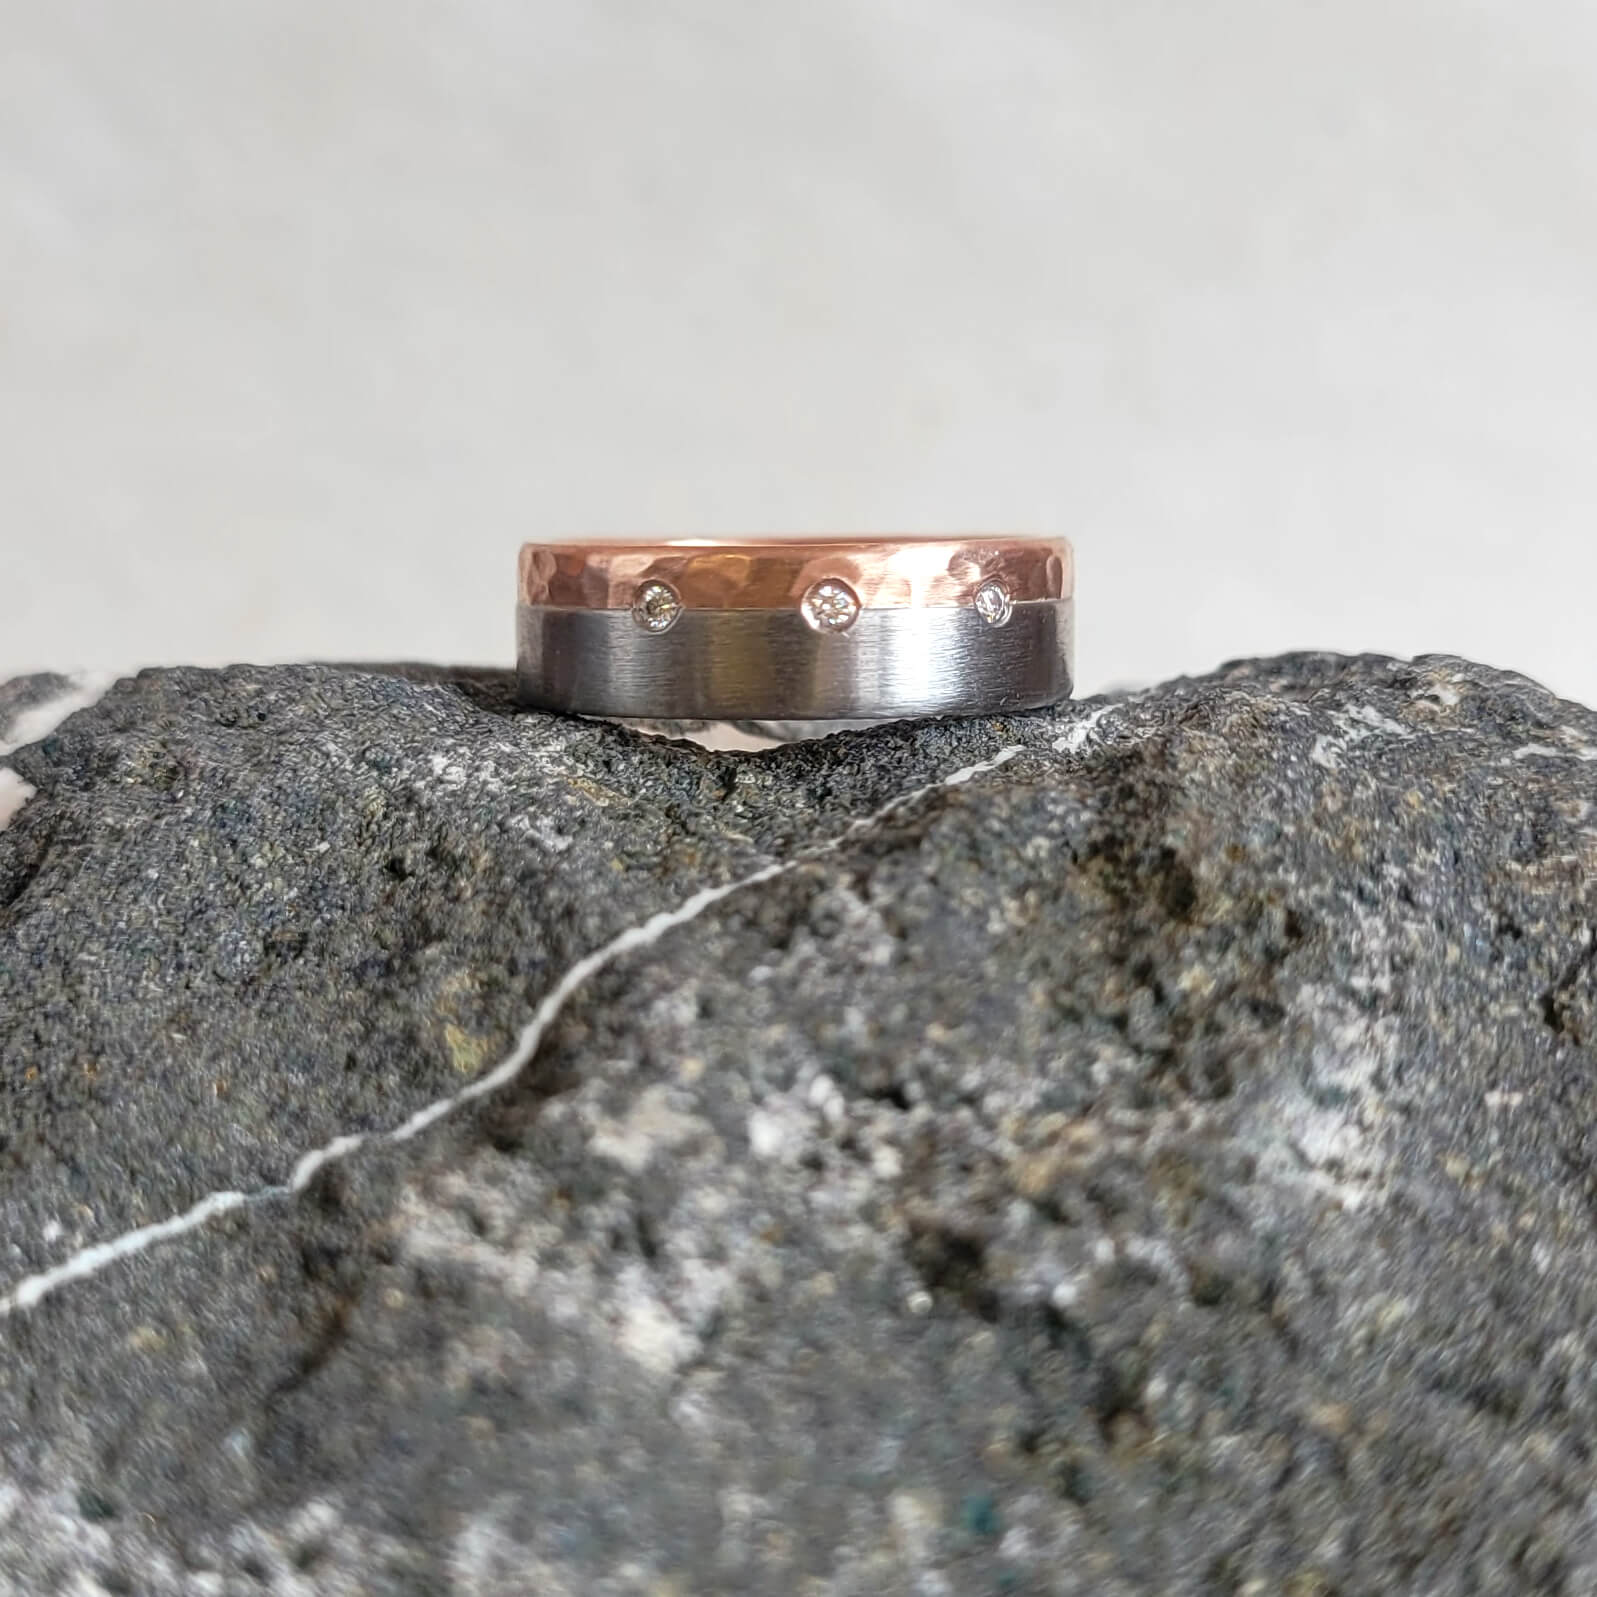 Rose gold and palladium diamond band from EC Design Jewelry in Minneapolis, MN.